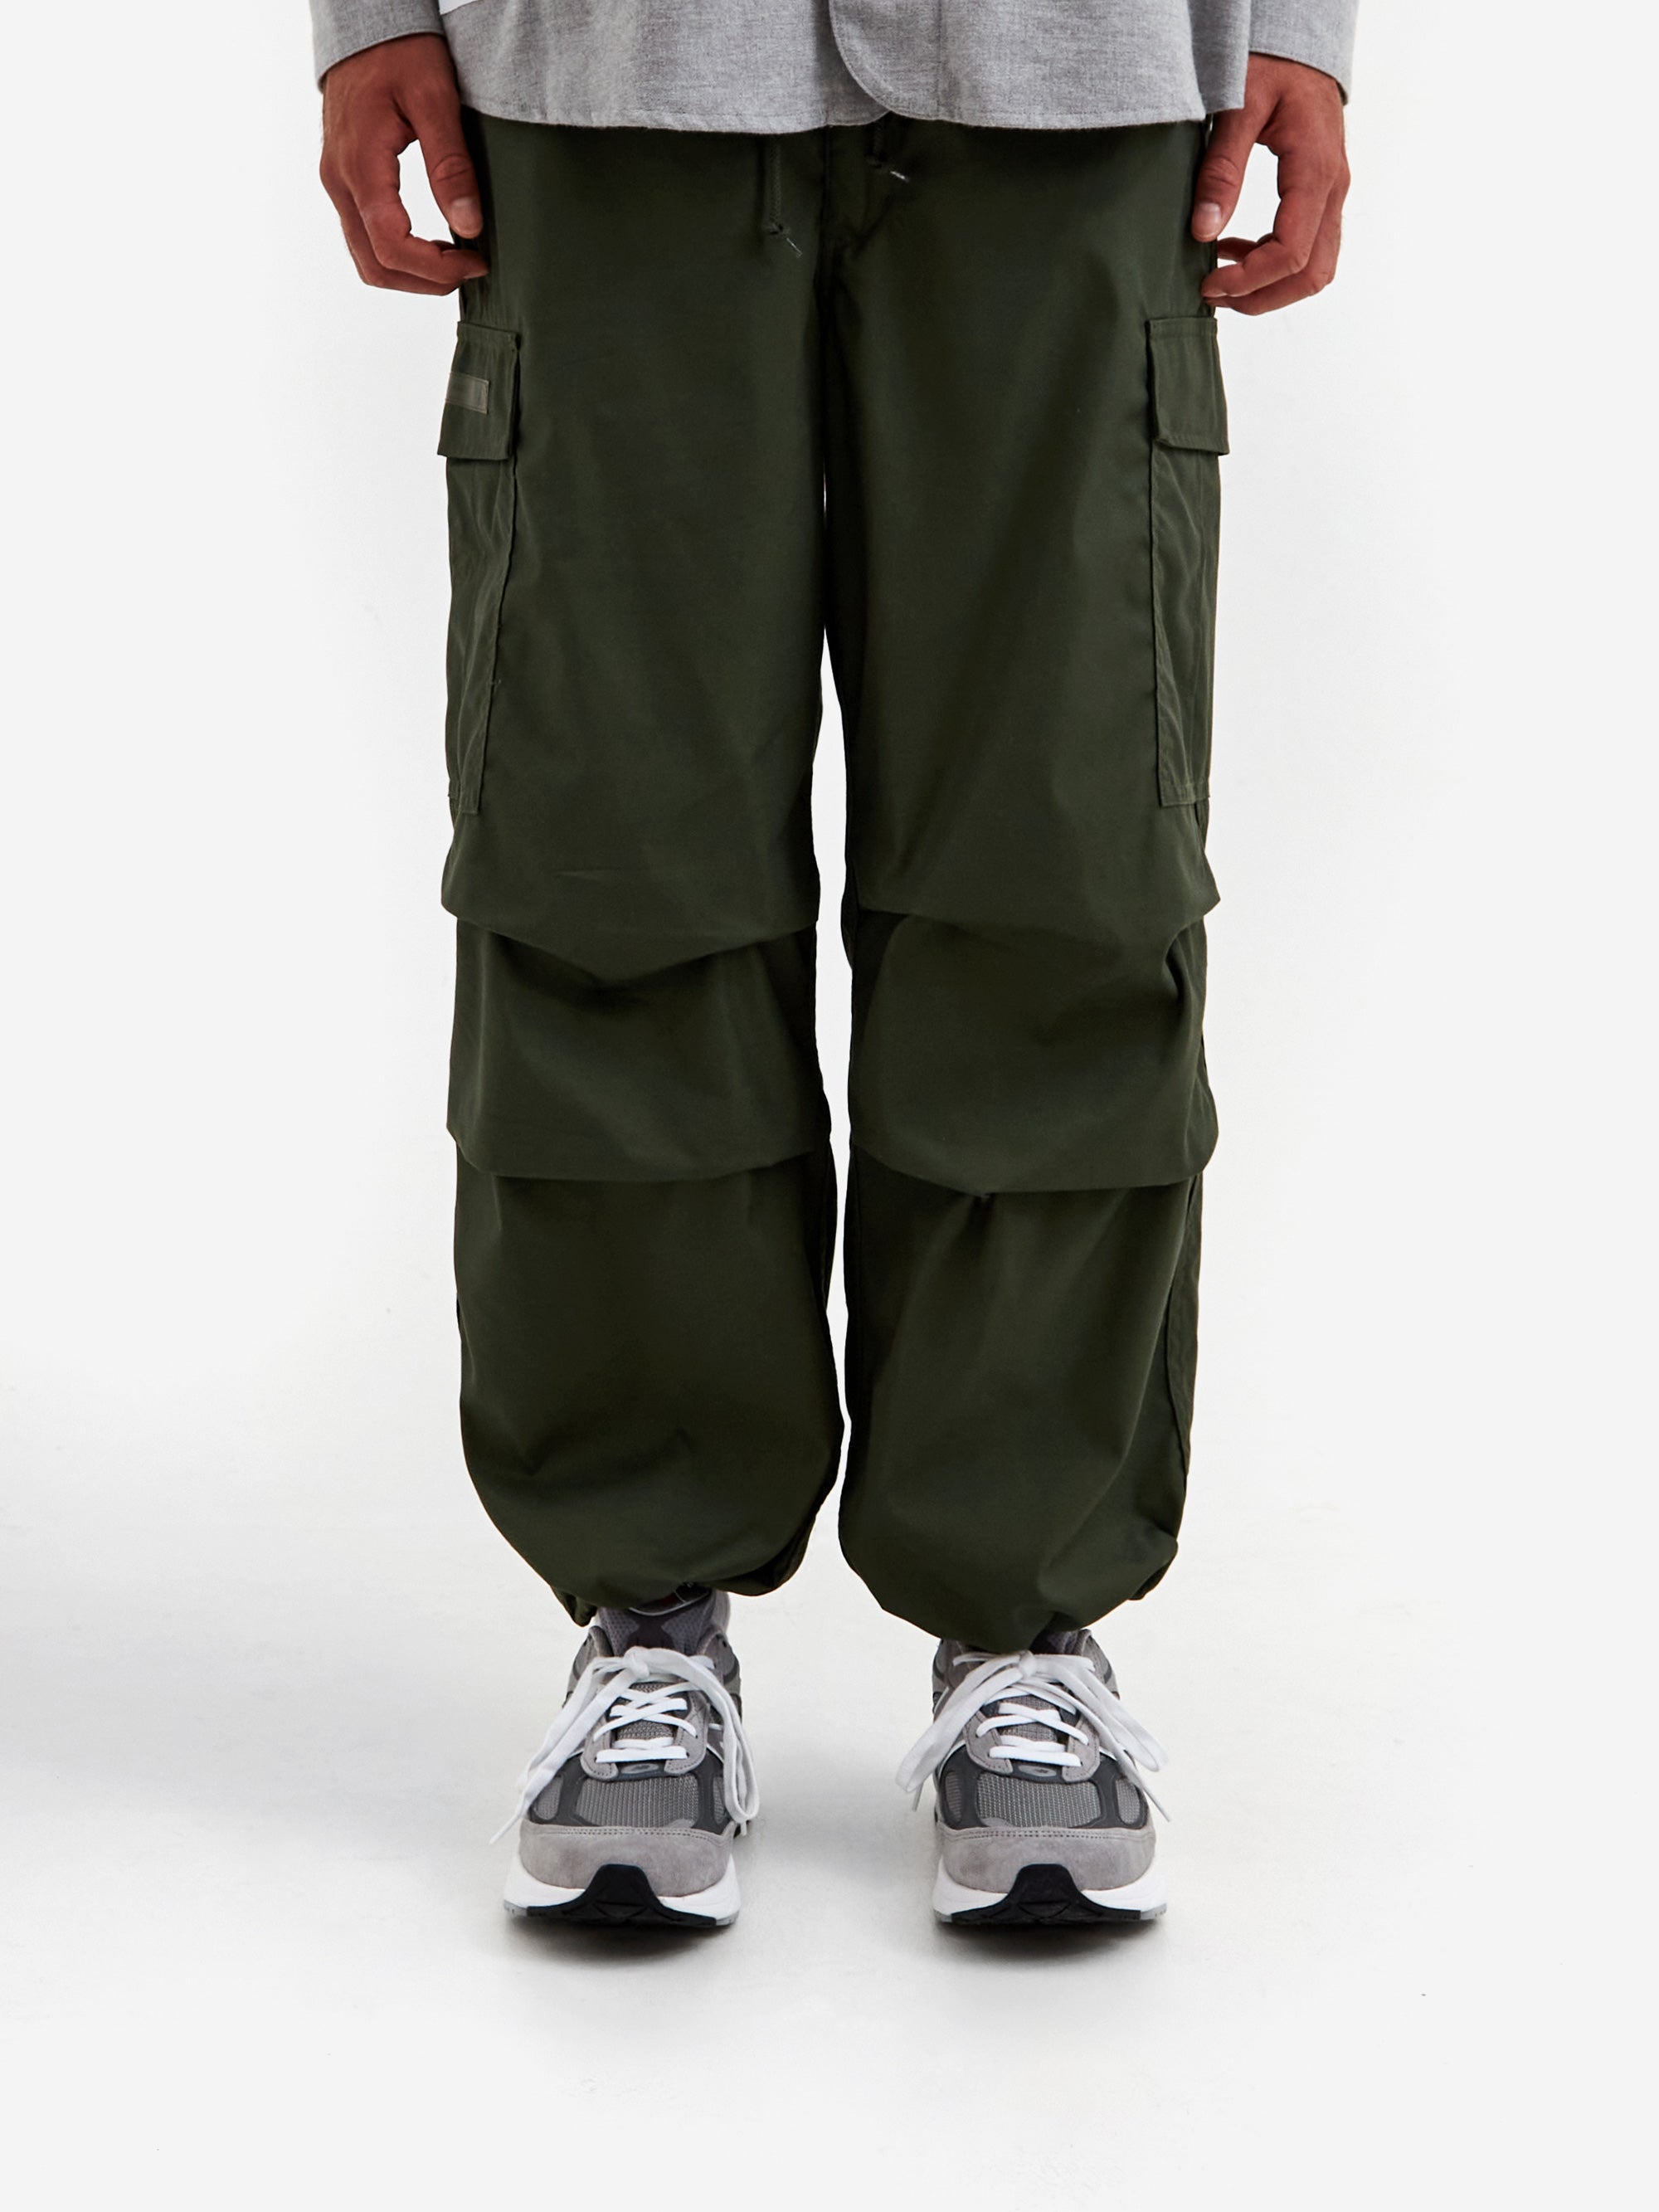 WTAPS MILT0001 / Trousers 14 / NYCO. Oxford - Olive Drab – Goodhood